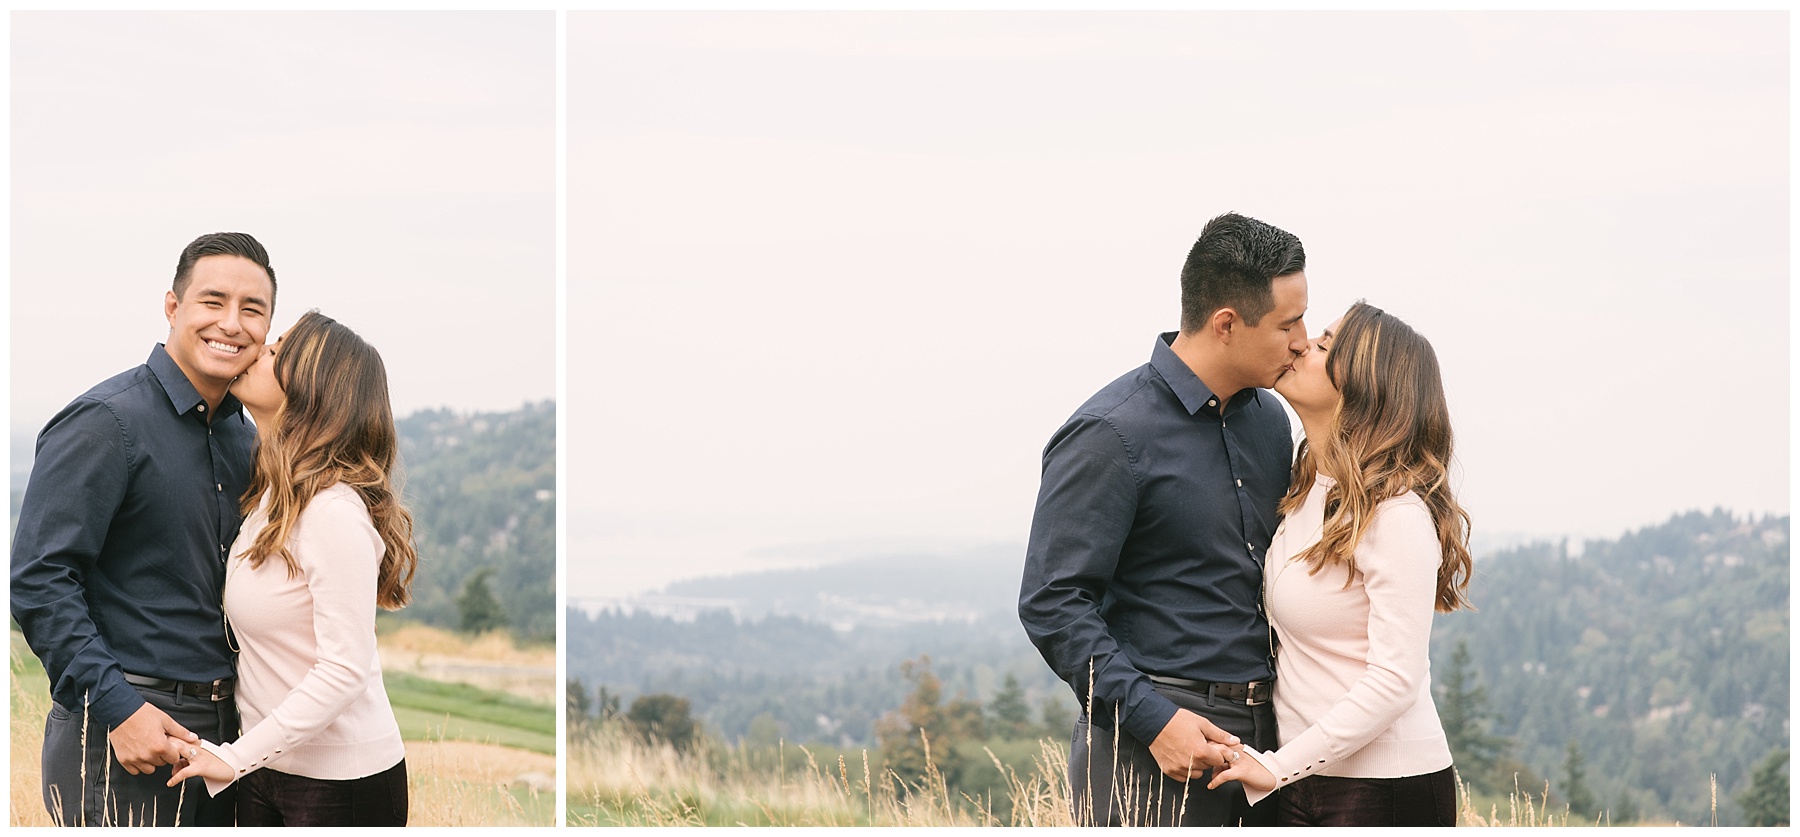 Usaventure, seattle, newcastle, the golf club at newcastle, the city of newcastle, destination wedding photographer, looks like film, natural light, oregon, idaho, seattle wedding photograper, weddings